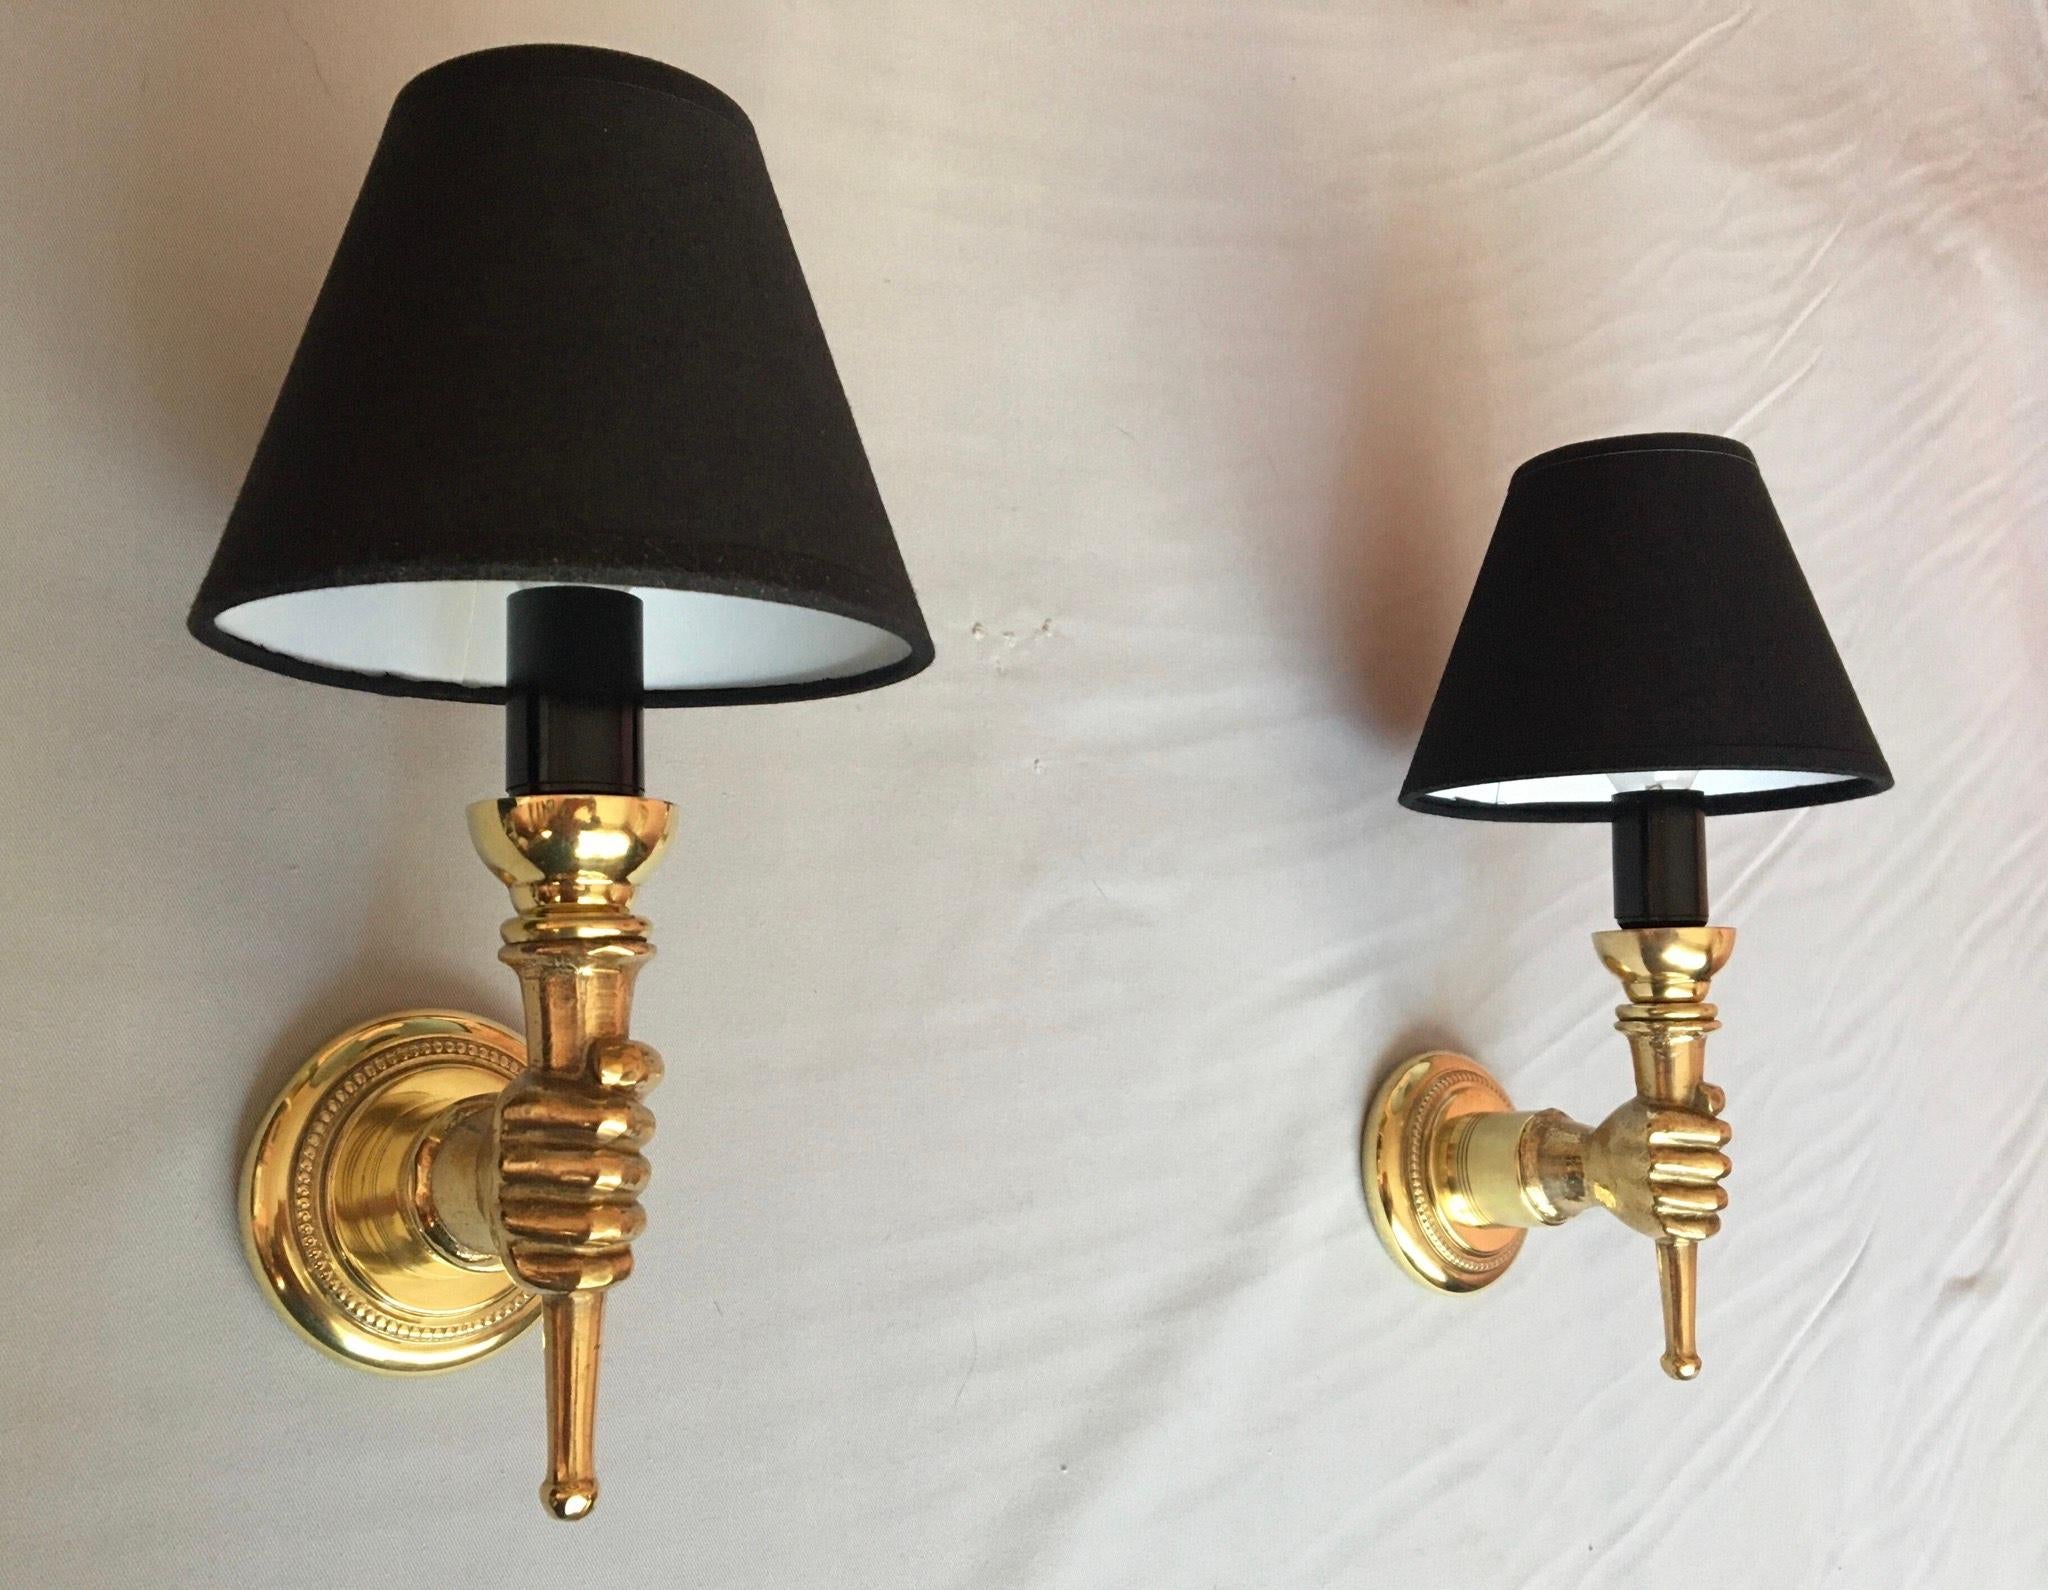 Elegant Andre Arbus style pair of French neoclassical style sconces of the 50’s made in gilted bronze, brass with black cotton lampshades.
The electric part has been renewed and fits the US standards. ( screw bulb holder, 100 watts maxi ). The